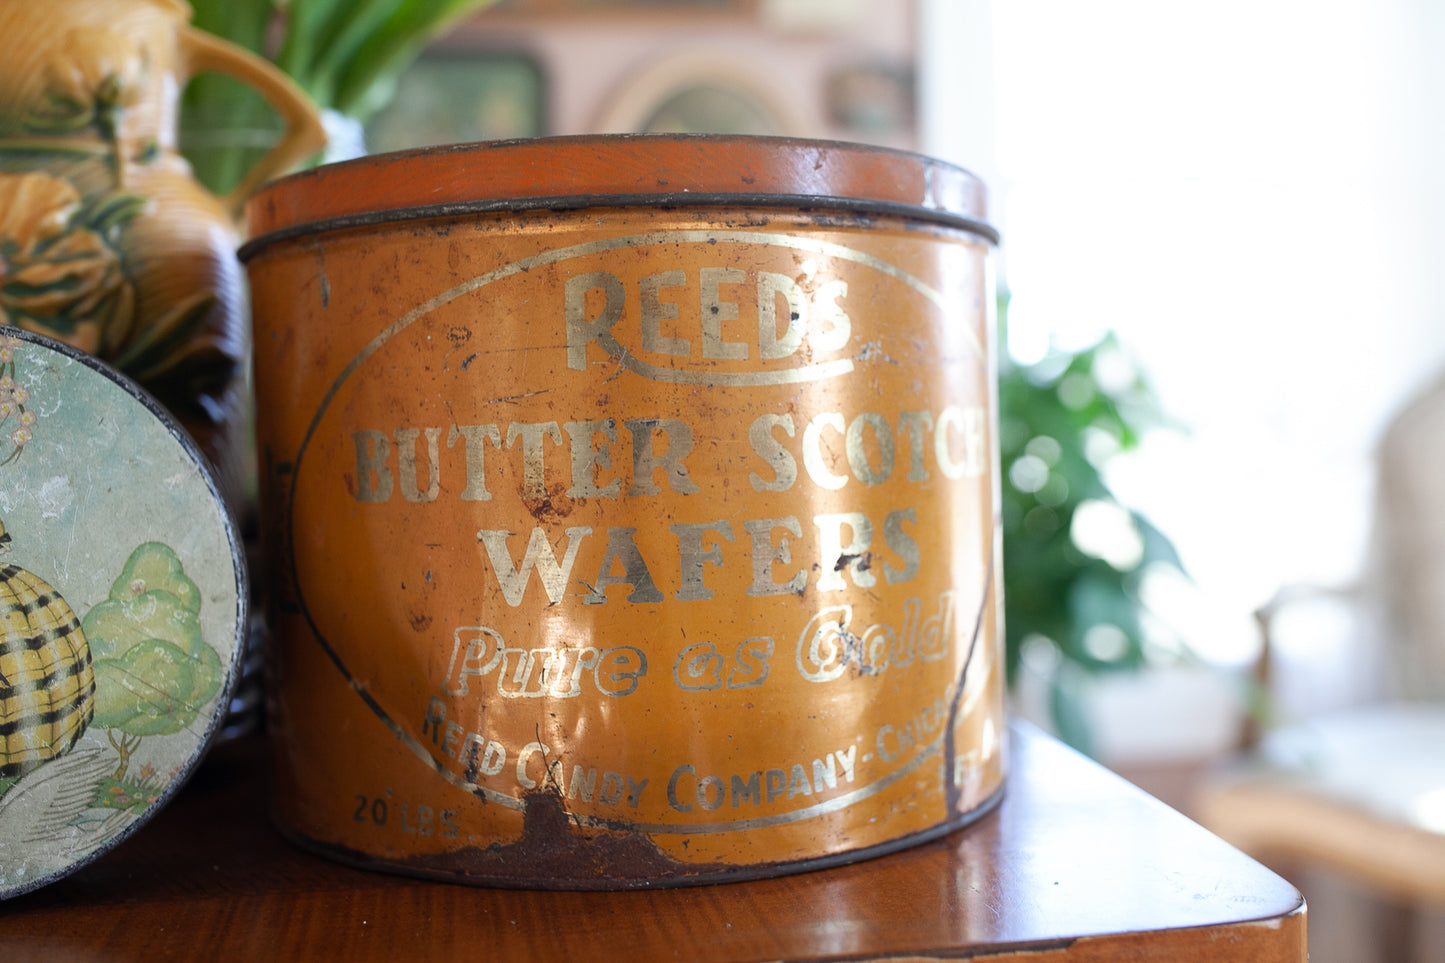 Vintage General Store Reed’s Butter Scotch Wafers Tin Chicago 20lbs  -Advertising Tin